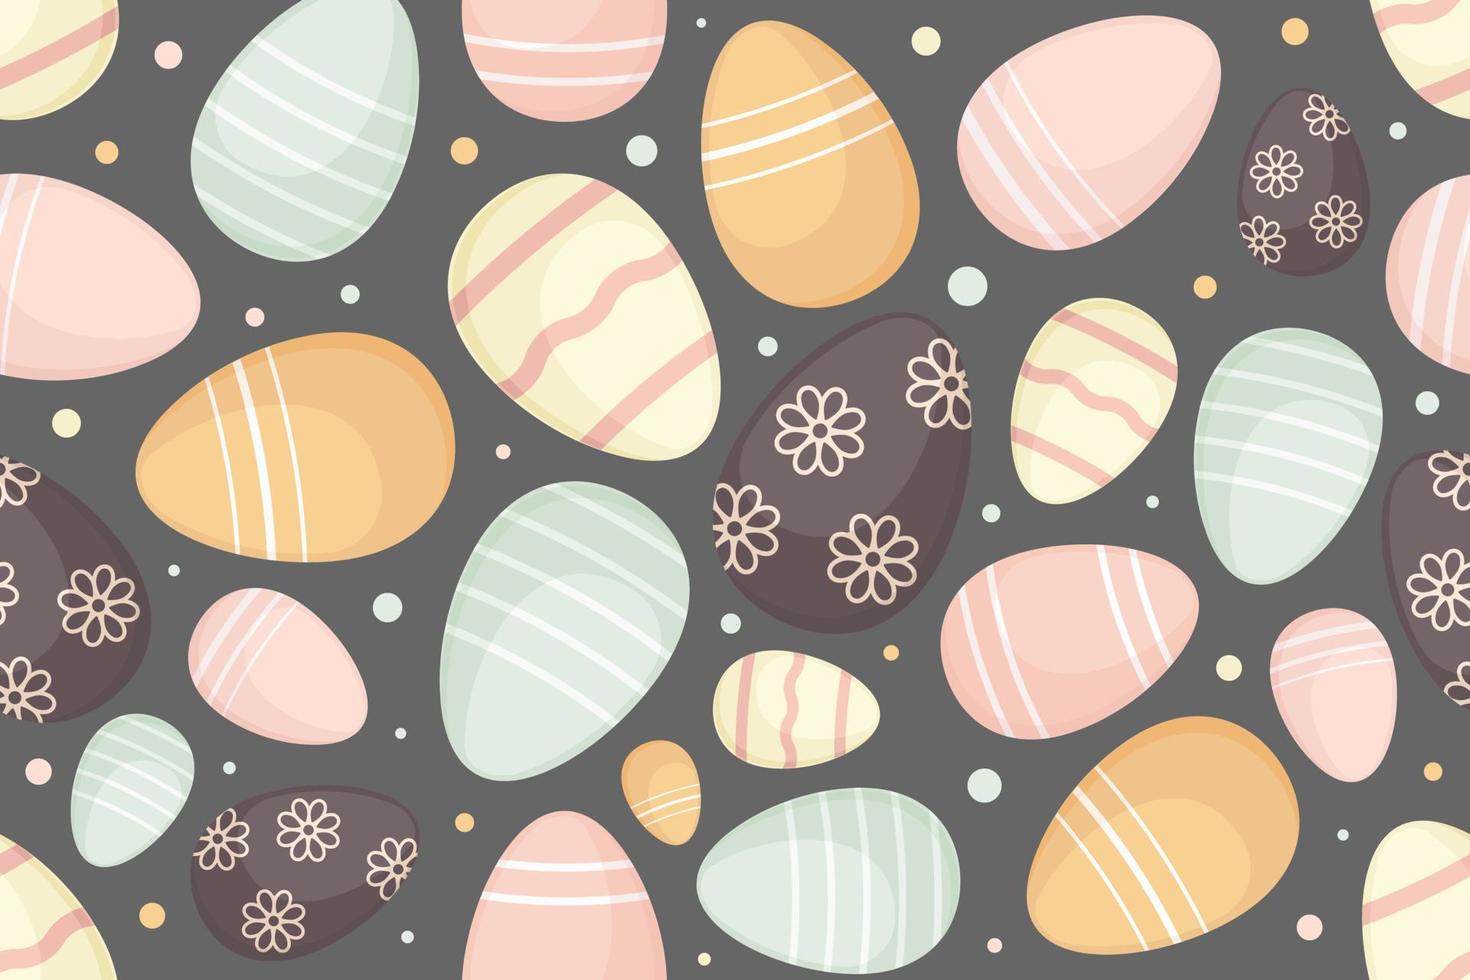 Decorated Easter eggs on dark background, seamless pattern. Easter background. Design for textiles, packaging, wrappers, greeting cards, paper, printing vector